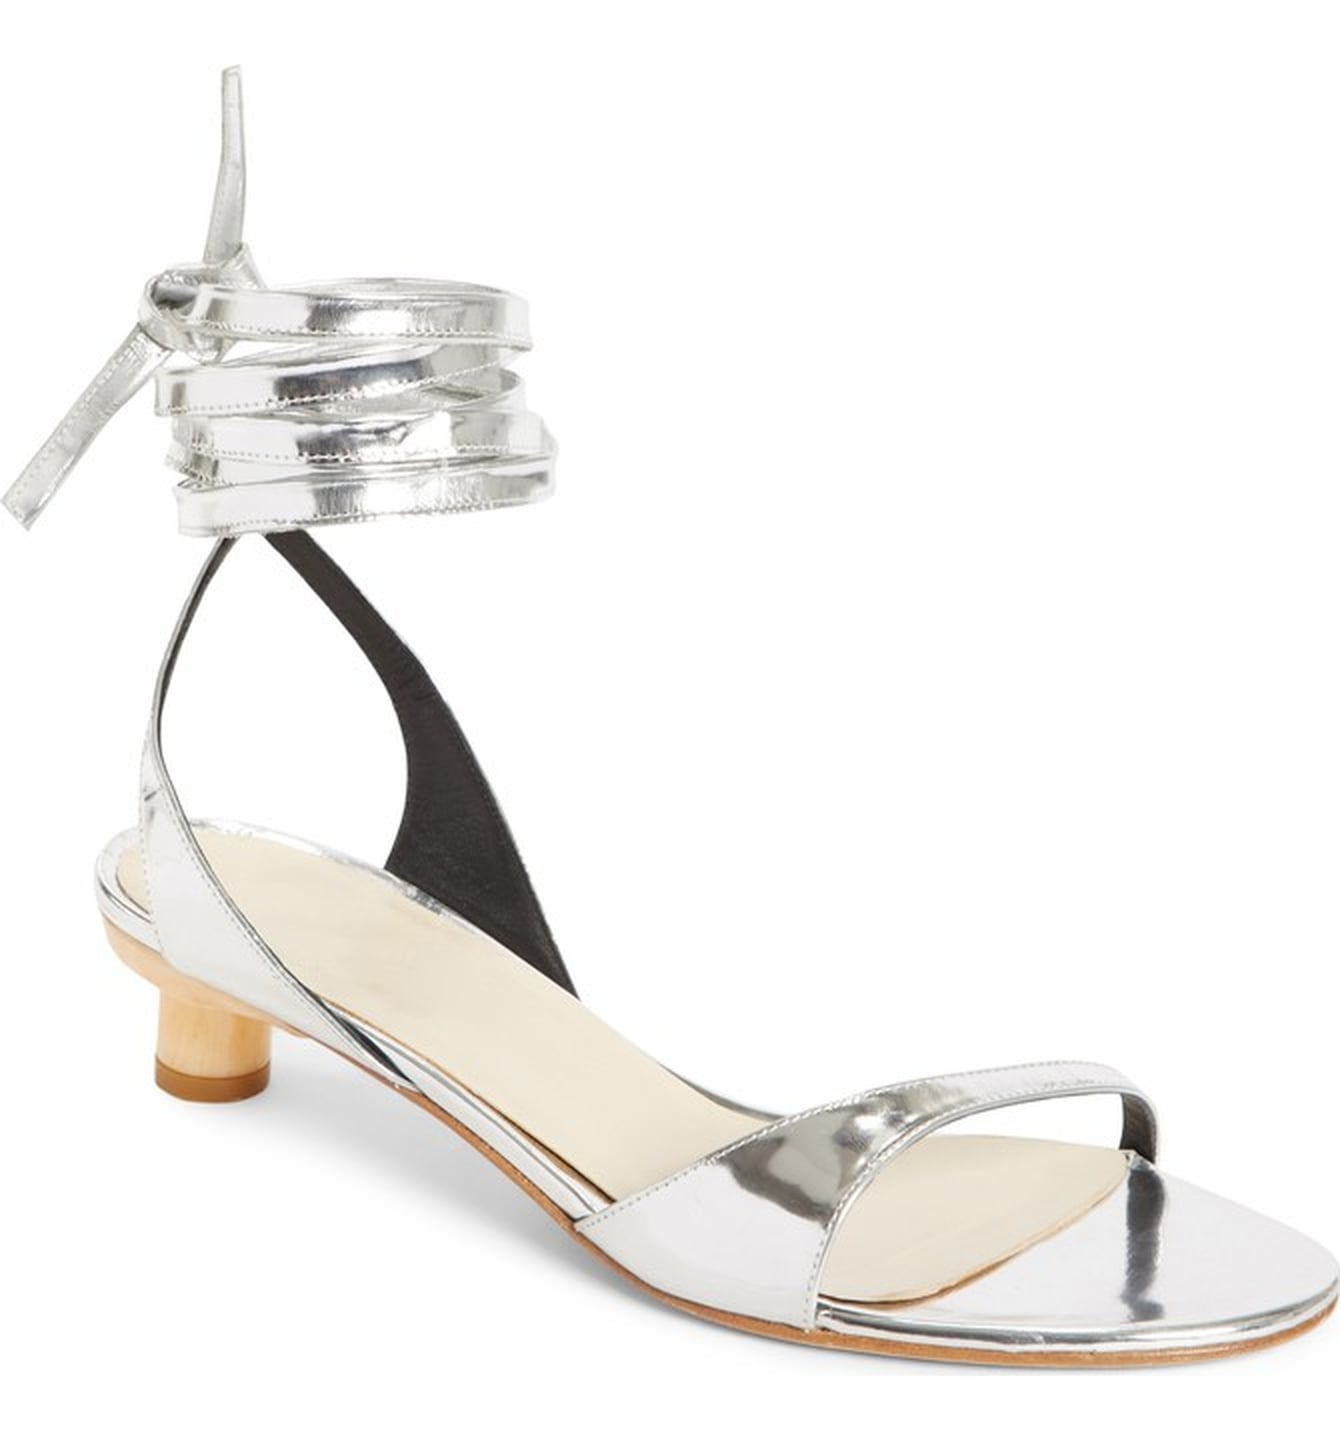 Shoes For a Wedding in the Spring and Summer | POPSUGAR Fashion